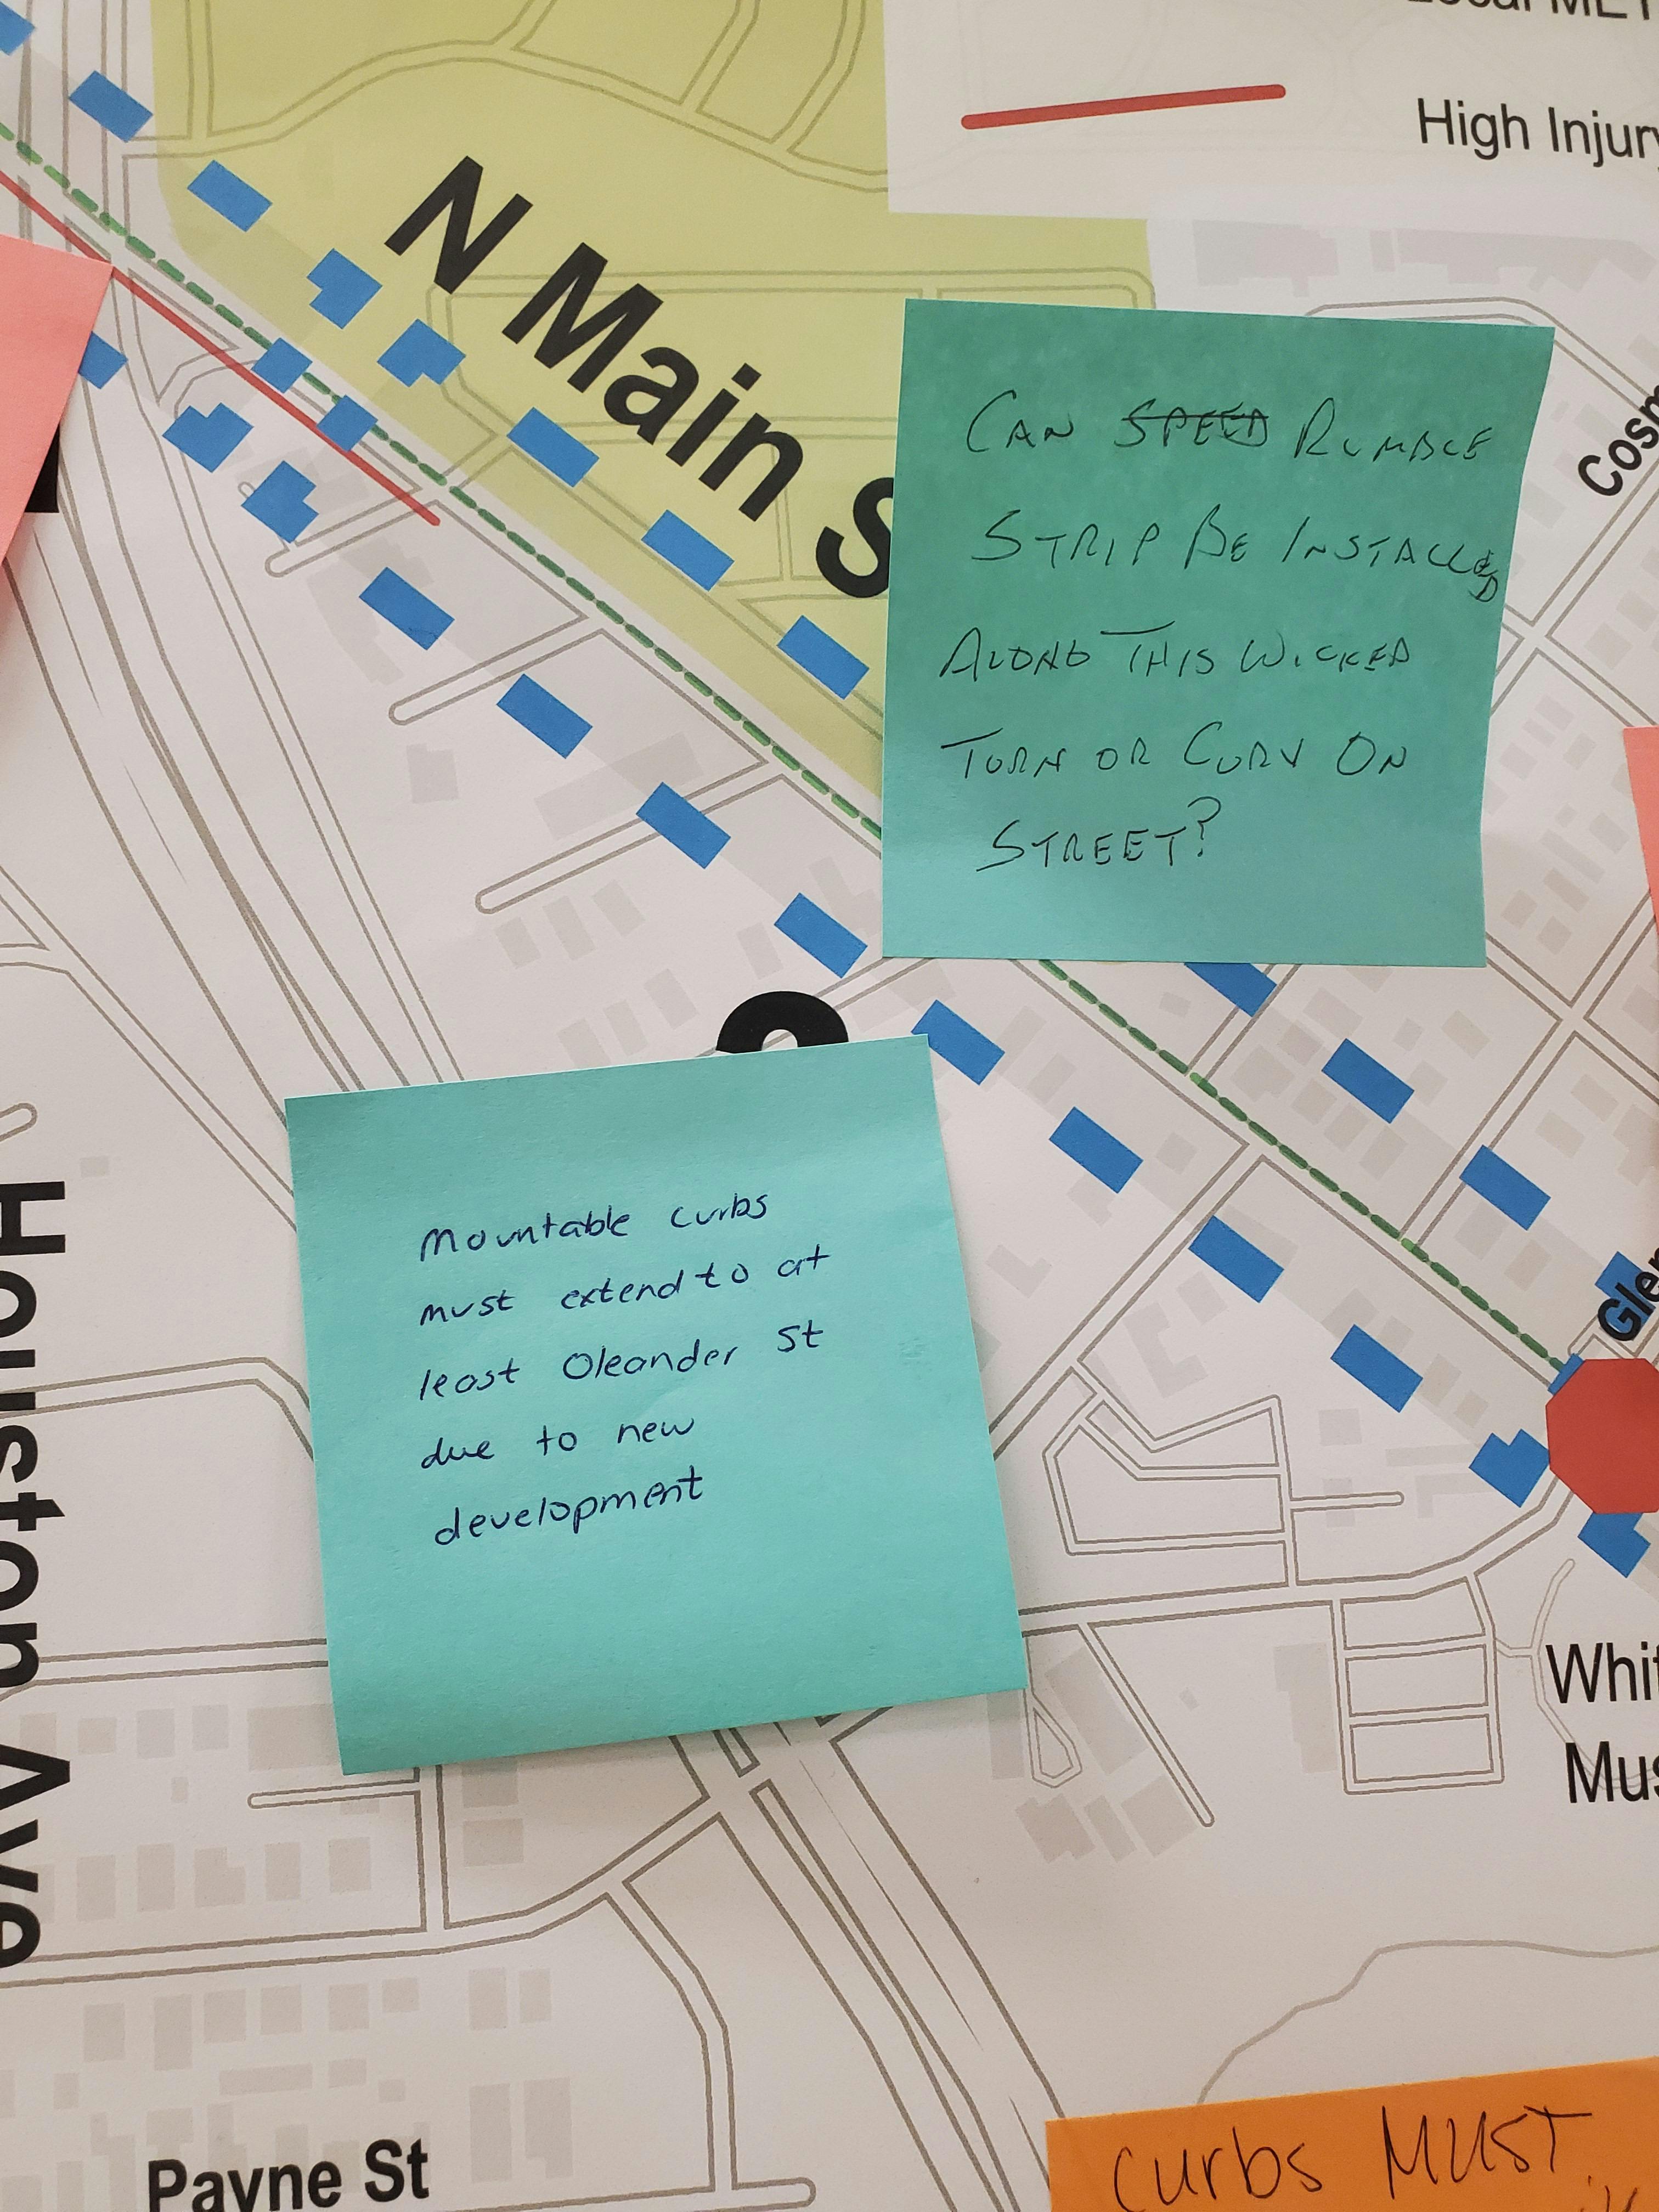 Comments on Proposed Travel Patterns Phase 1 Posterboard